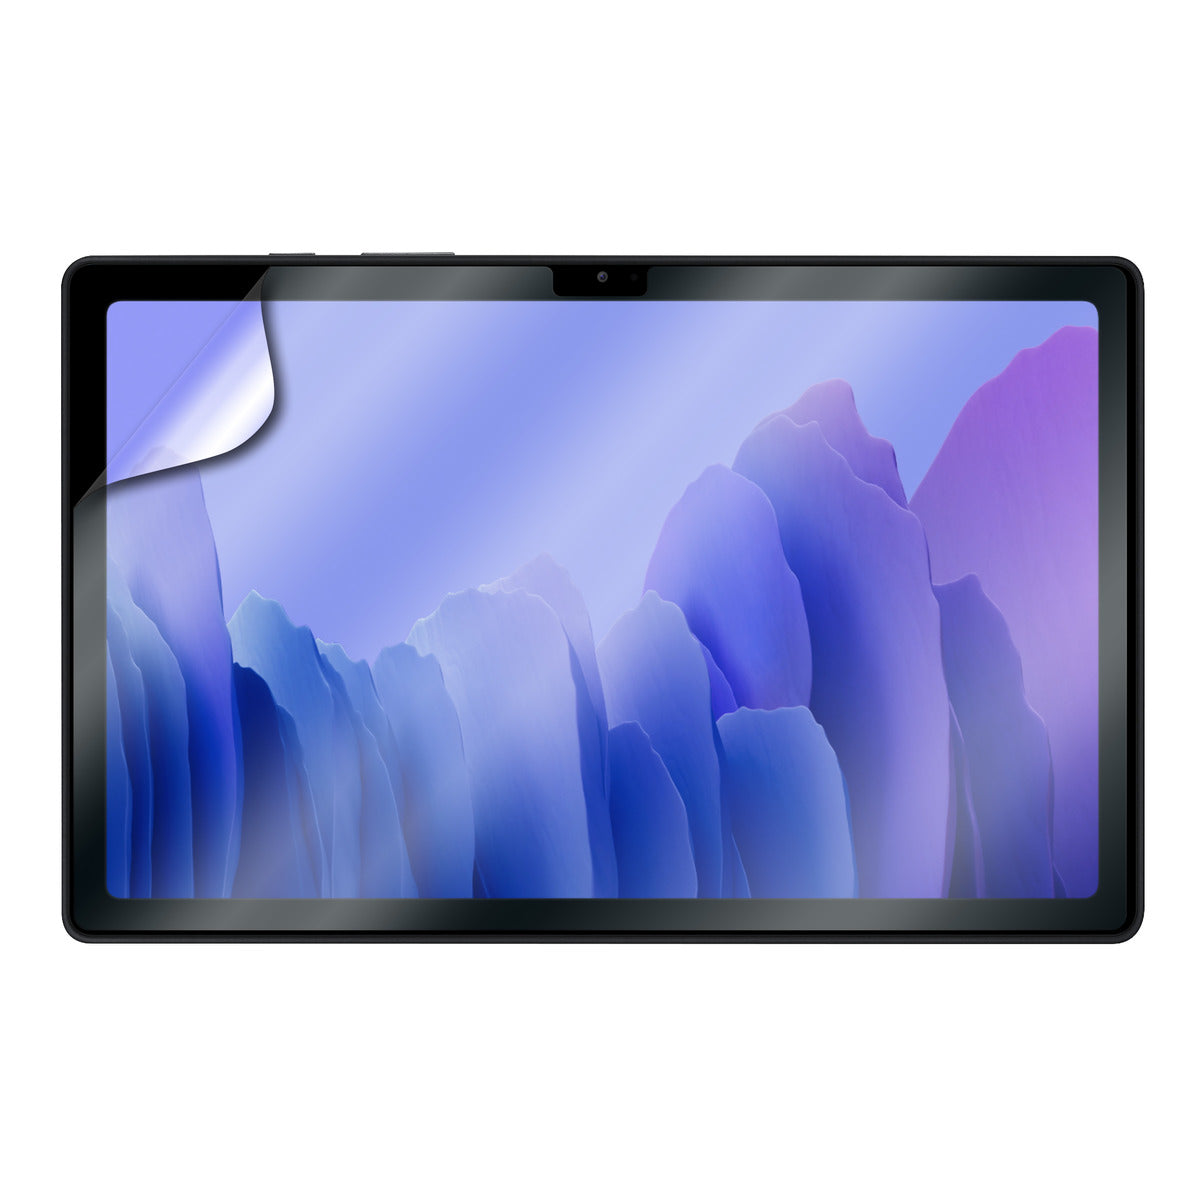 Anti-Glare Protective Film for iPad - Reduced Screen Reflection，iPad tenth  generation 2022-10.9 inches,iPad tenth generation 2022-10.9 inches,F50880 